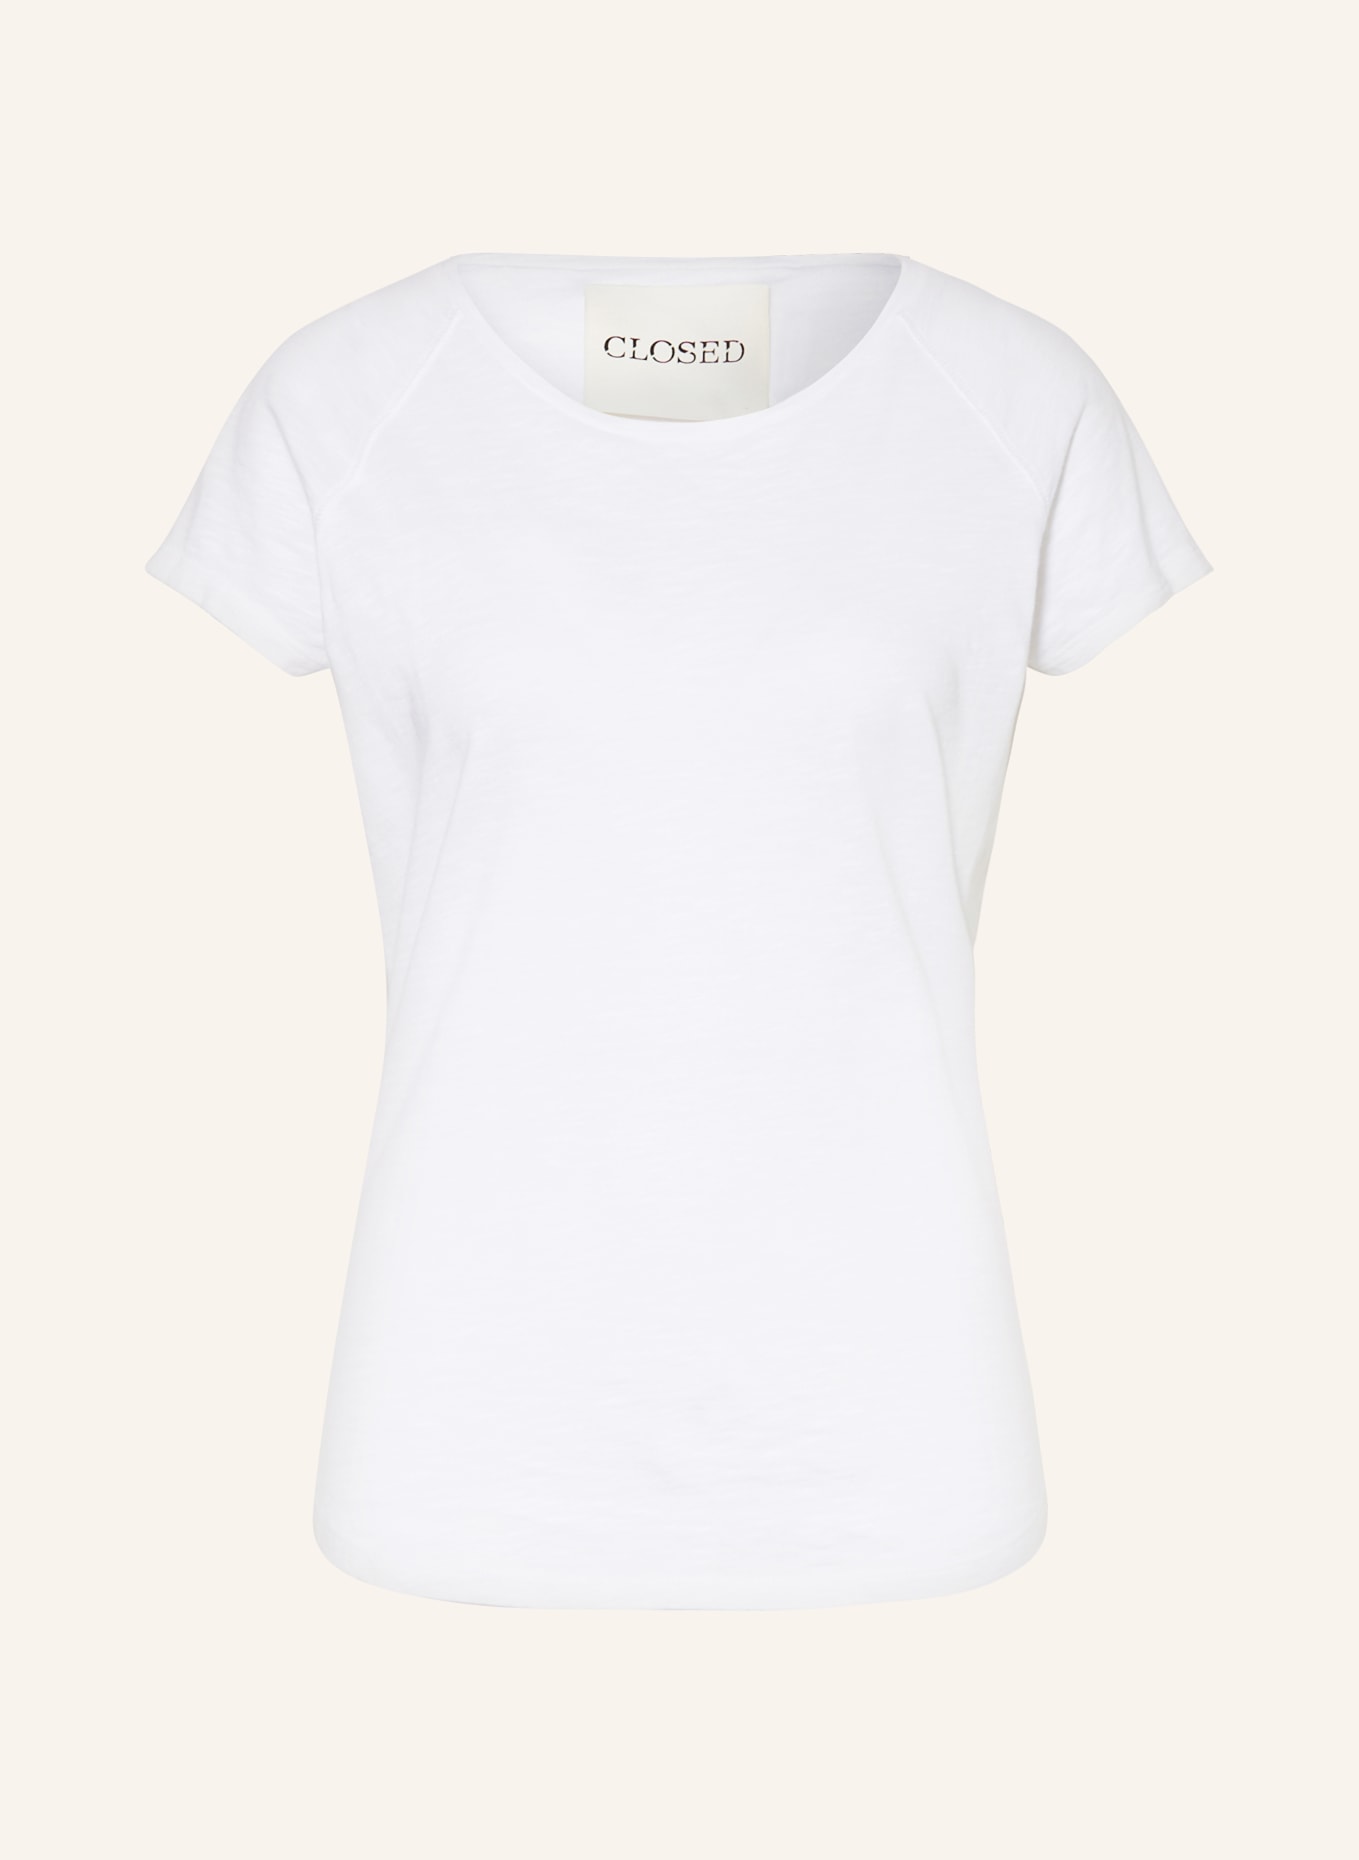 CLOSED T-shirt, Color: WHITE (Image 1)